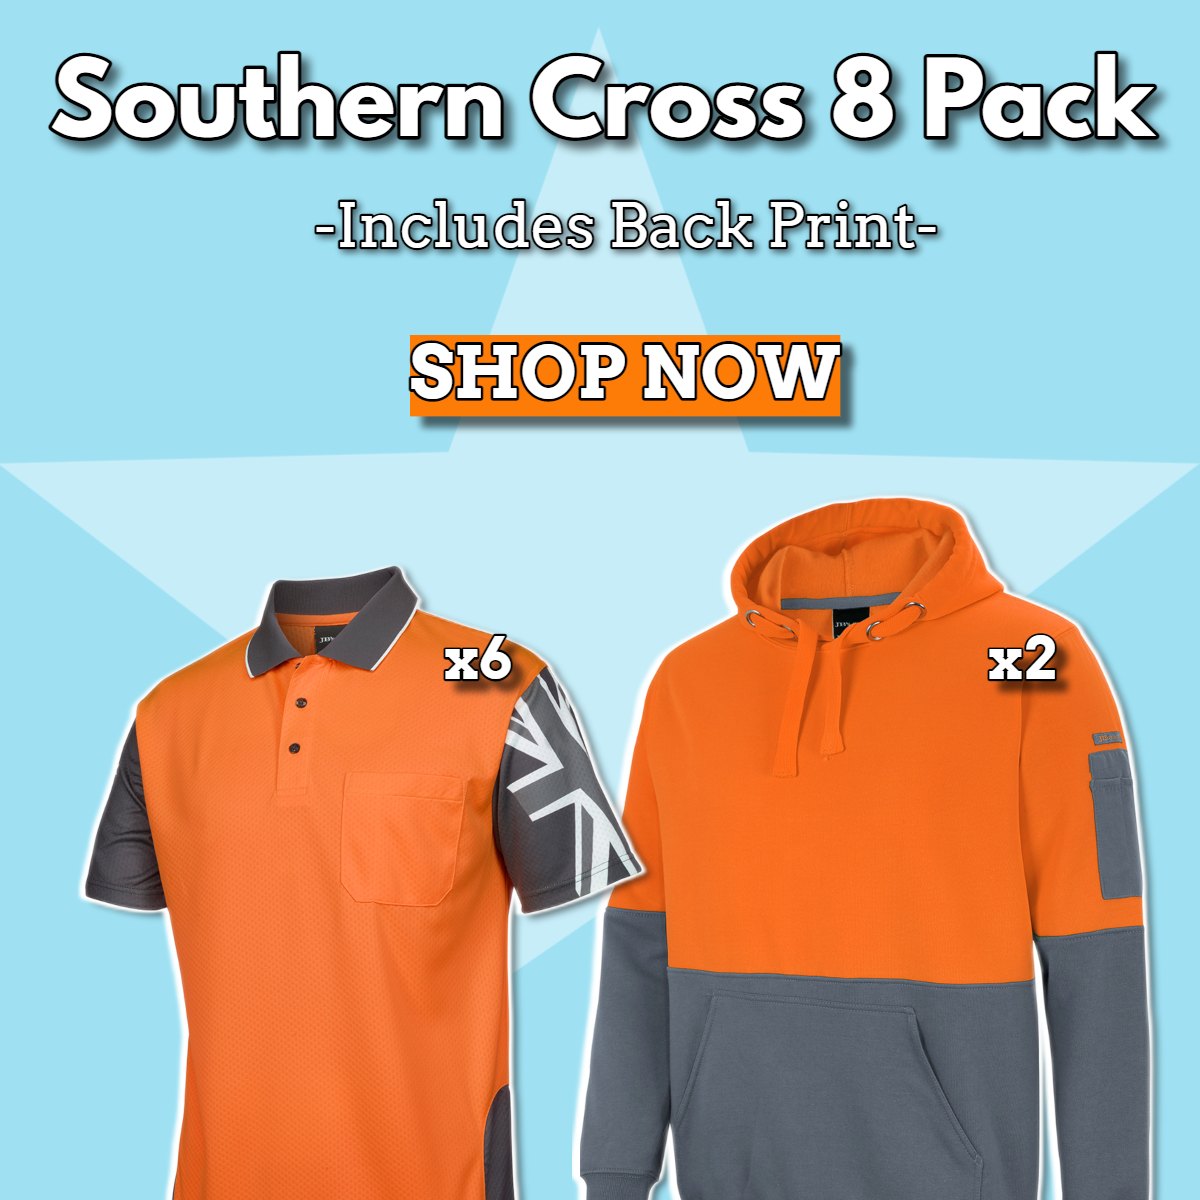 Southern Cross 8 Pack With Back Print